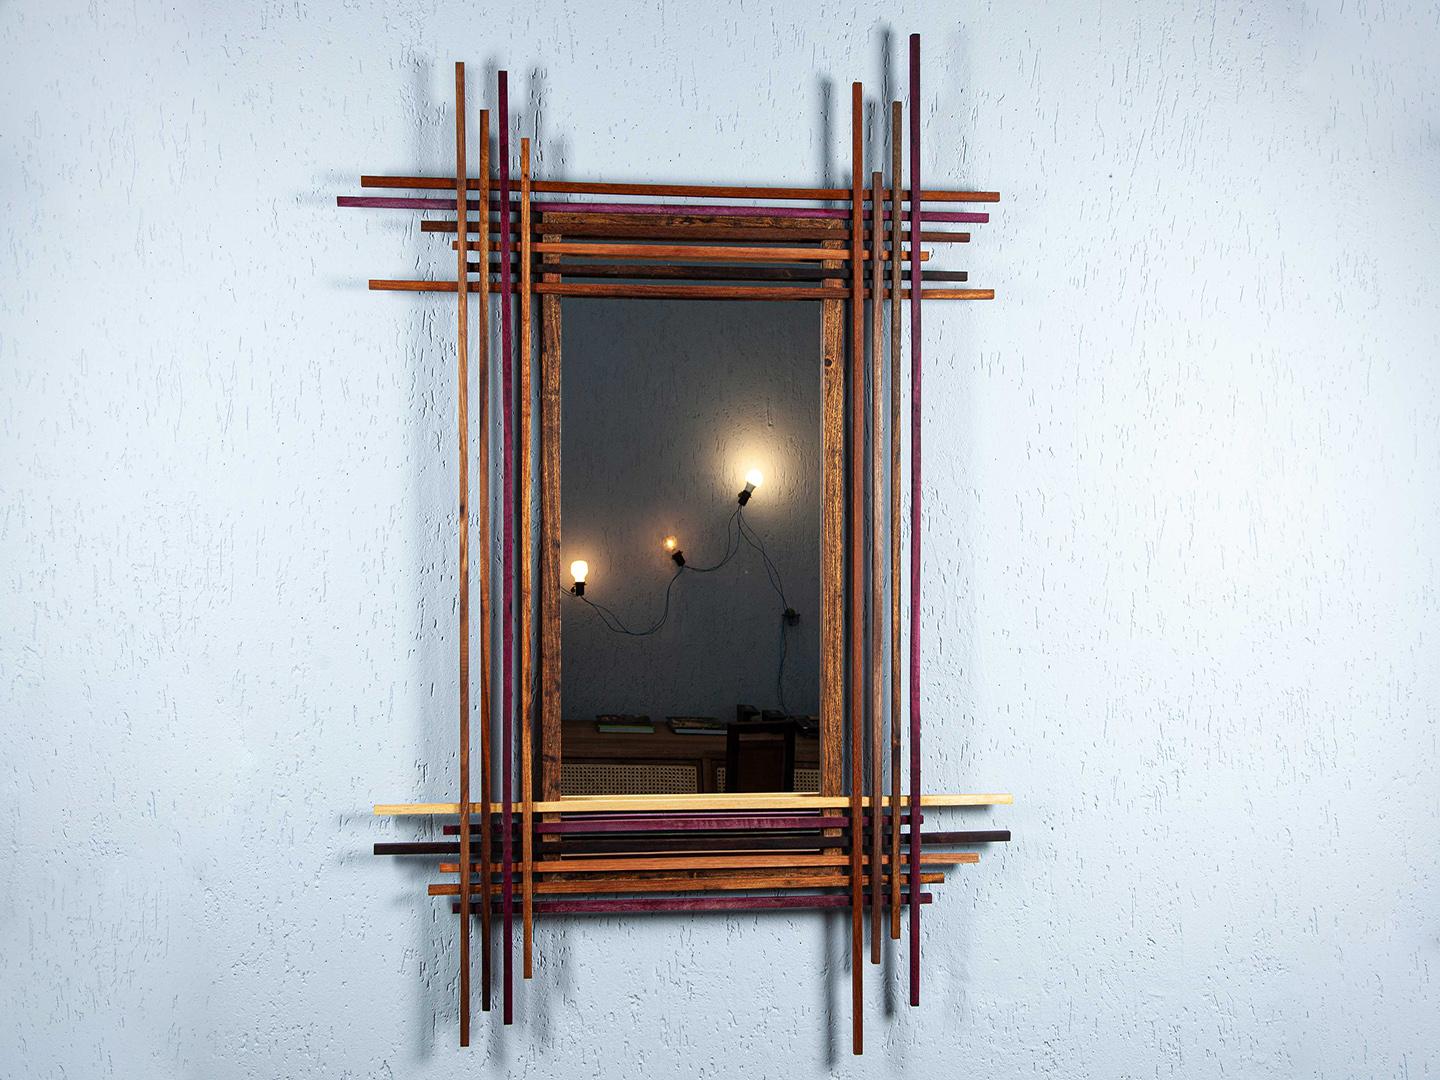 The Fragmentos mirror is crafted entirely from reclaimed woods sourced from previous projects. Its design seamlessly blends symmetry and asymmetry, yielding consistently diverse contours. No two mirrors have ever been identical.

The